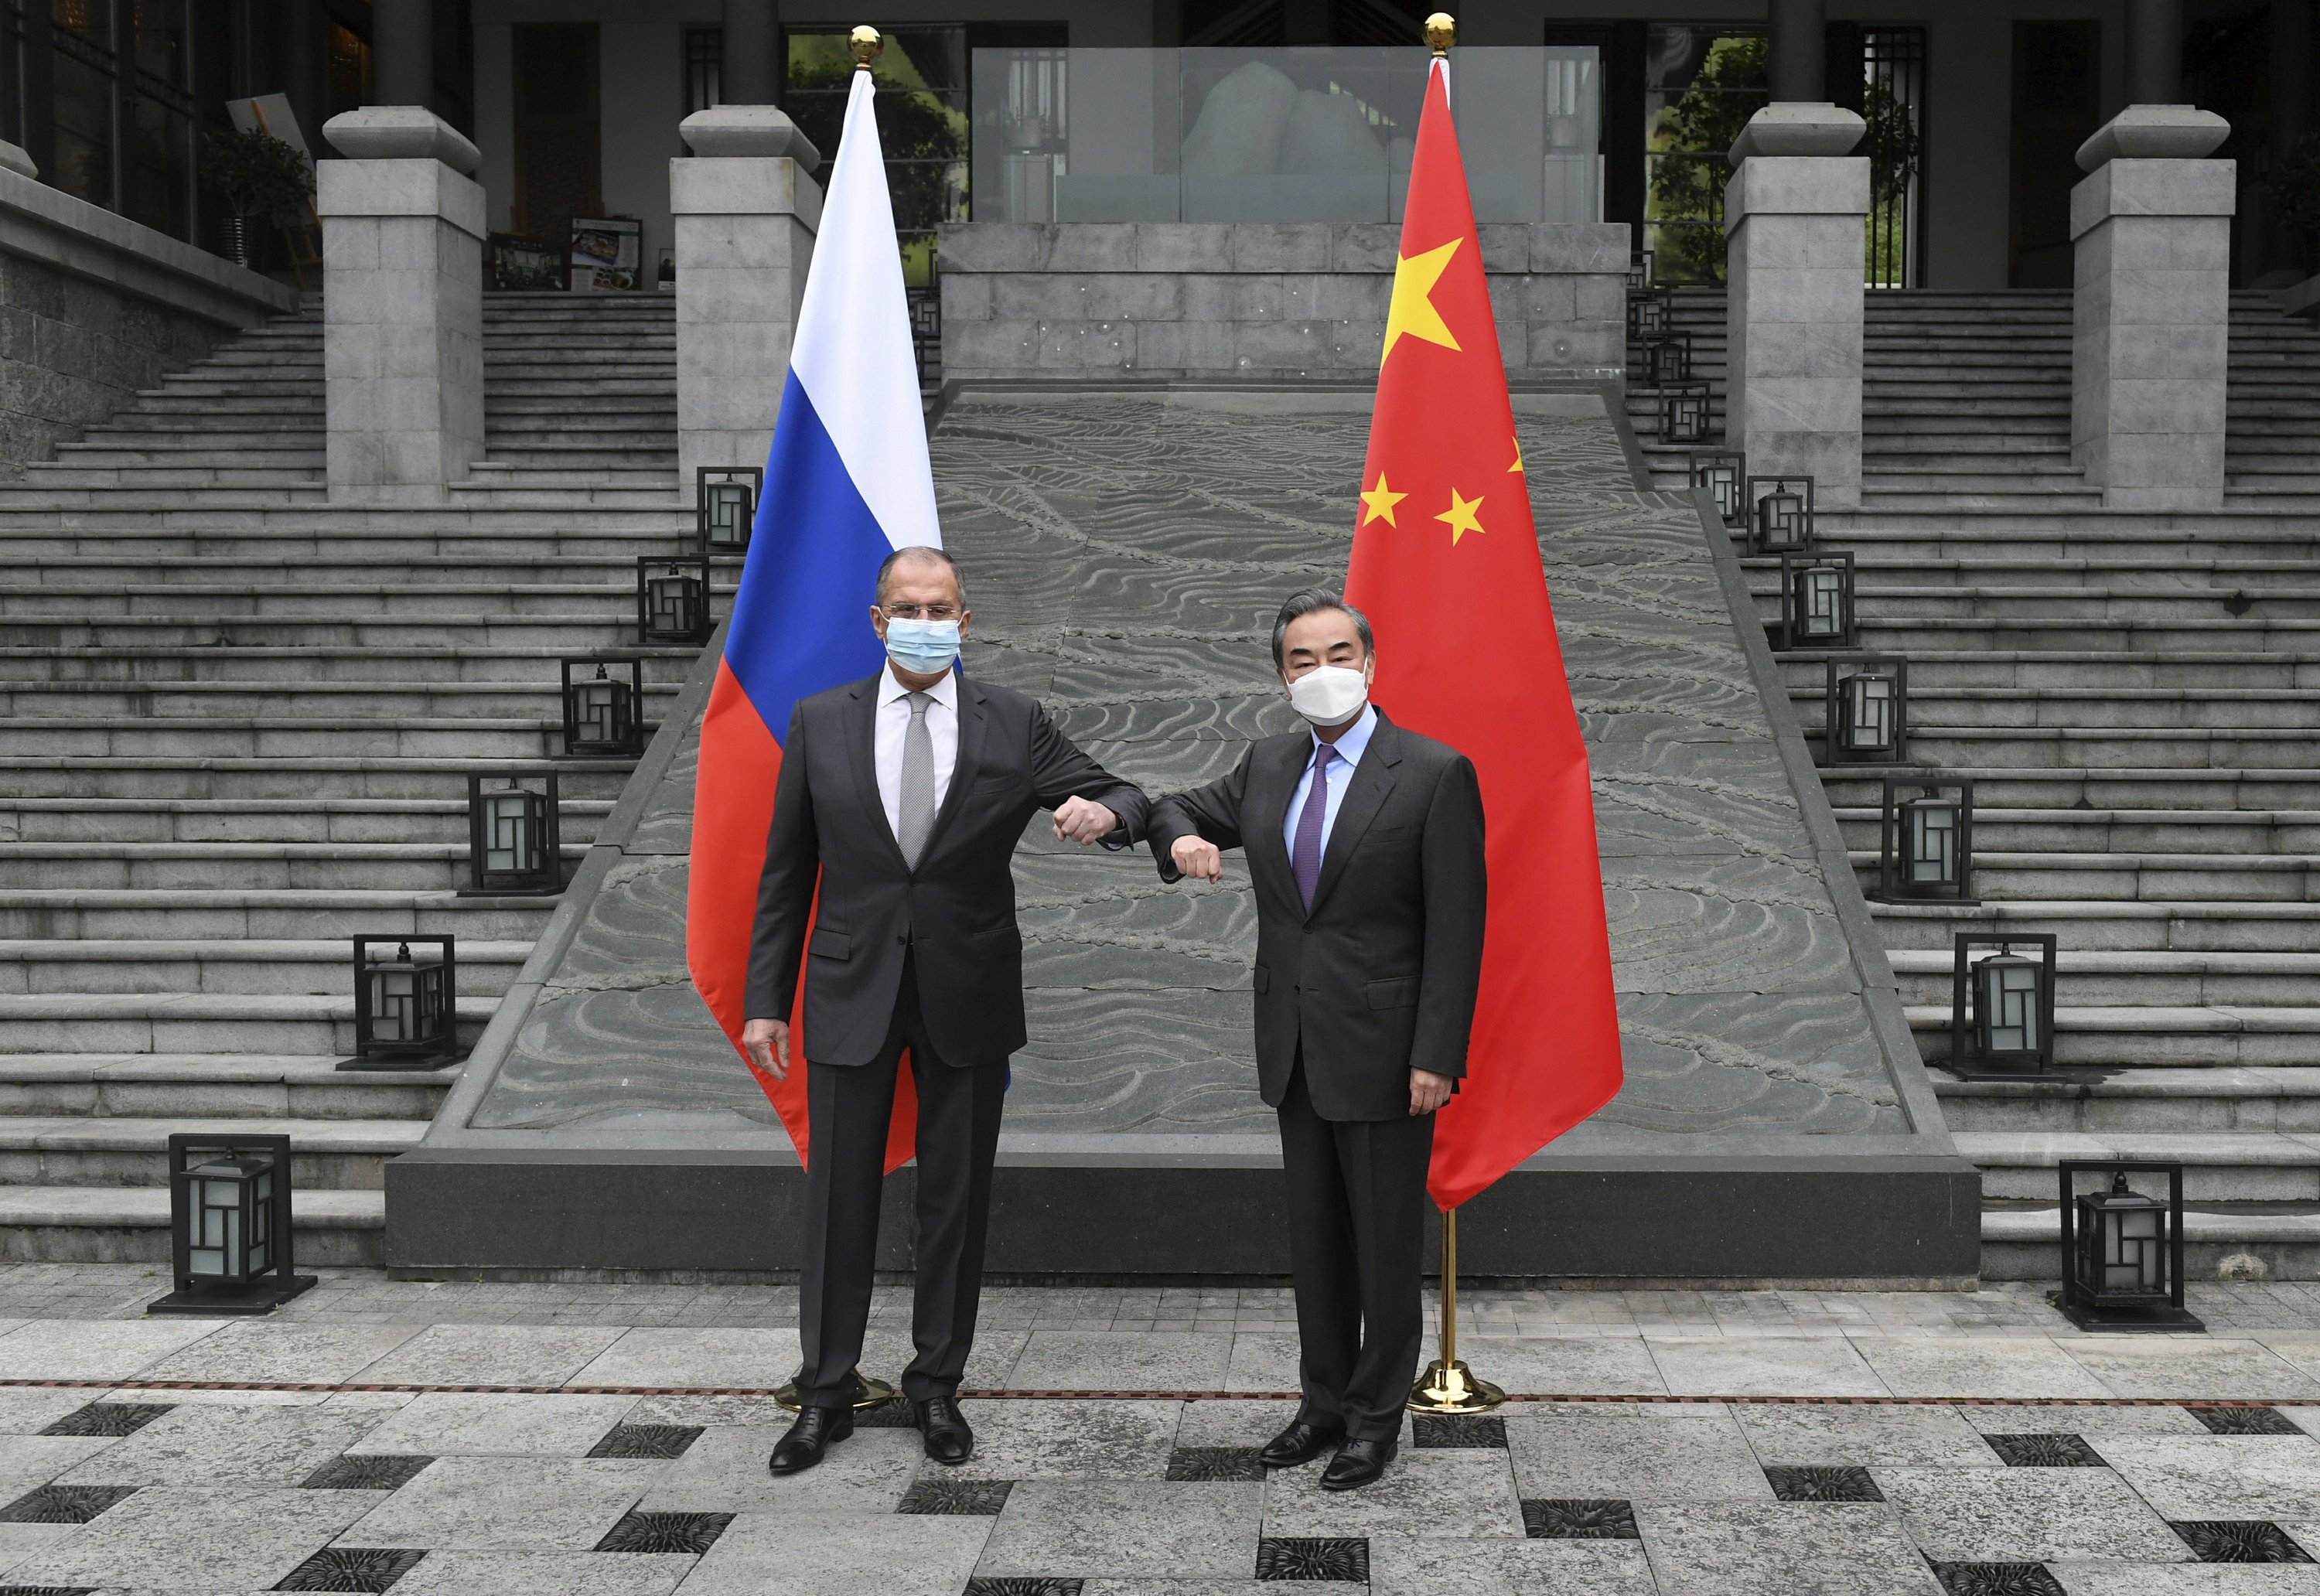 Chinese and Russian officials are meeting in unity against the EU and the US